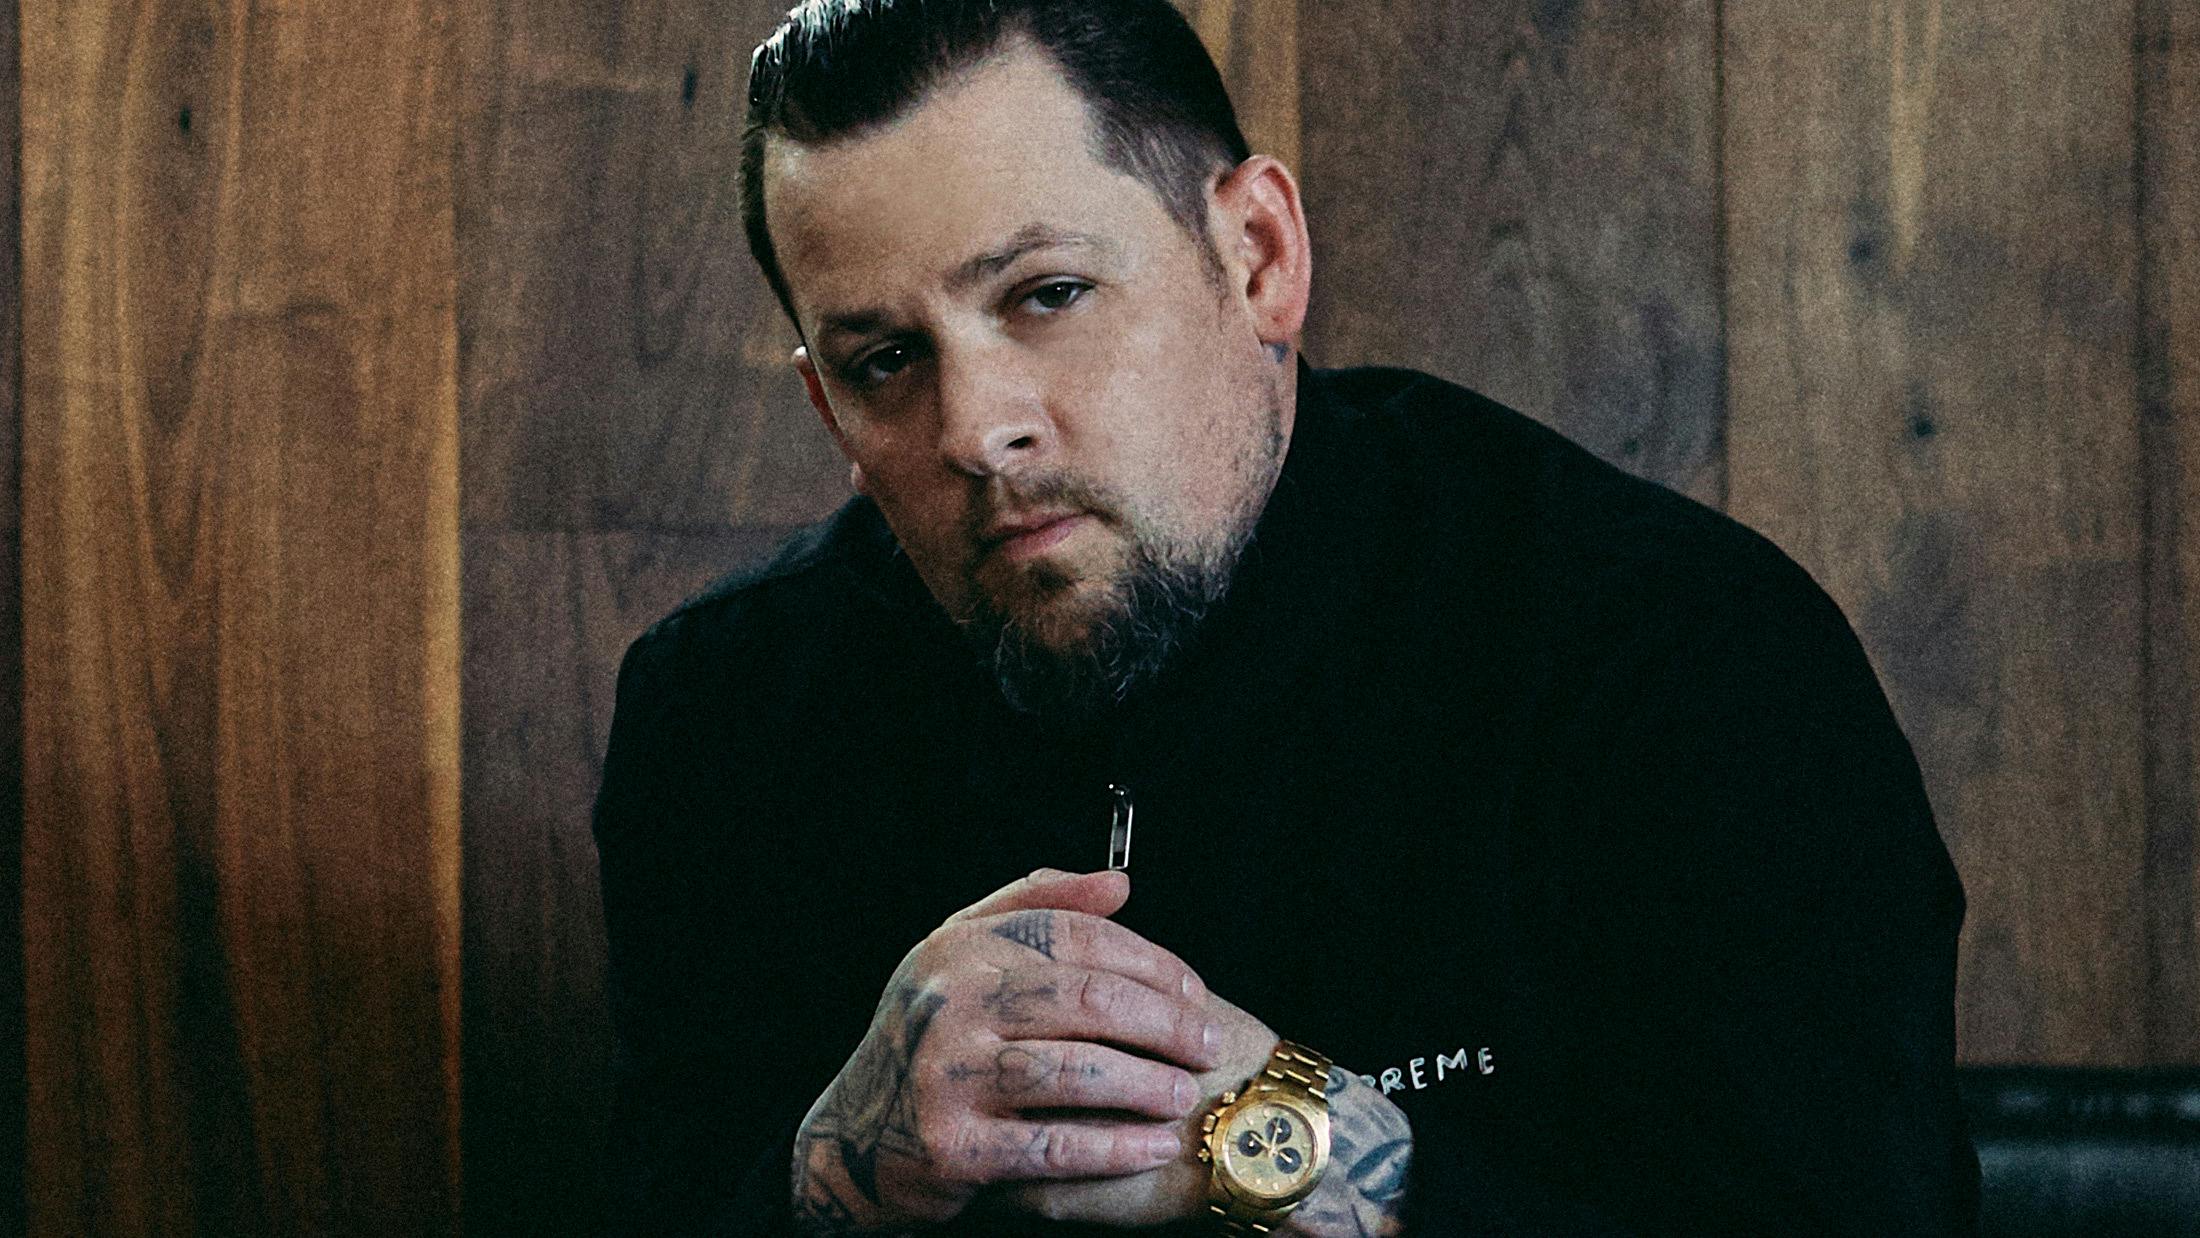 Good Charlotte's Joel Madden: "Work hard, be nice to people, be honest and believe in yourself"